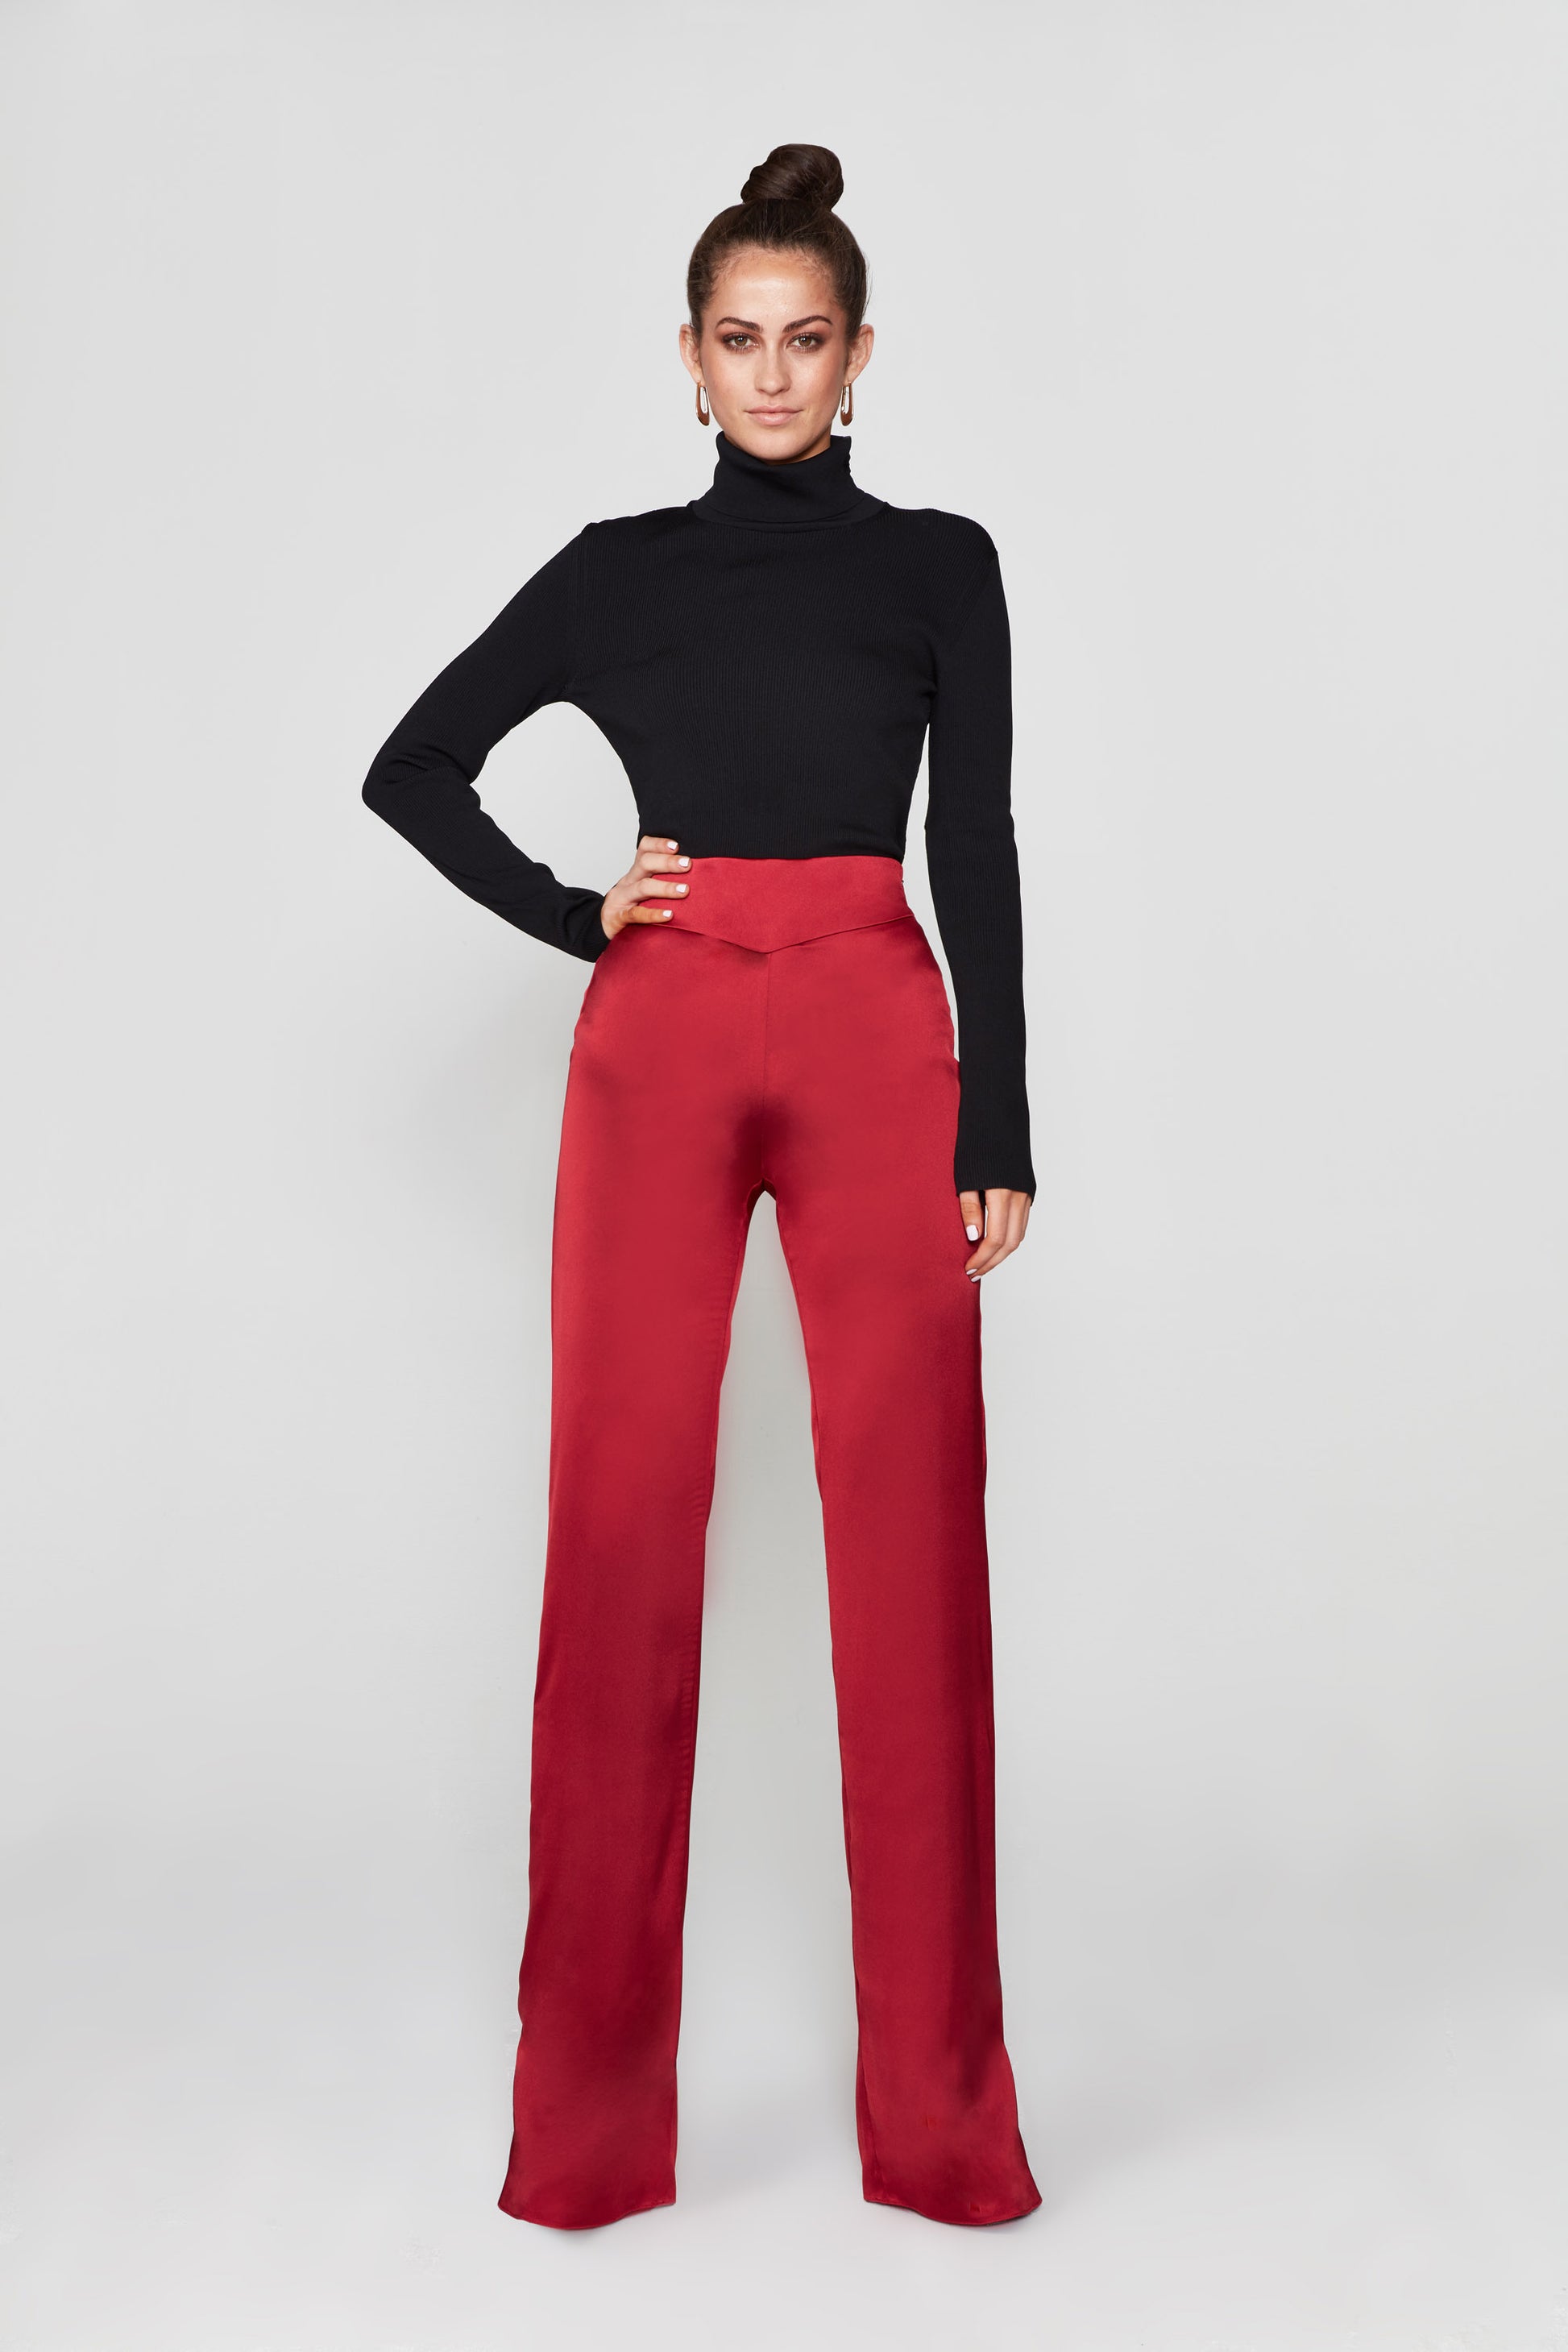 Red satin wide-leg pants. From The Sixes.